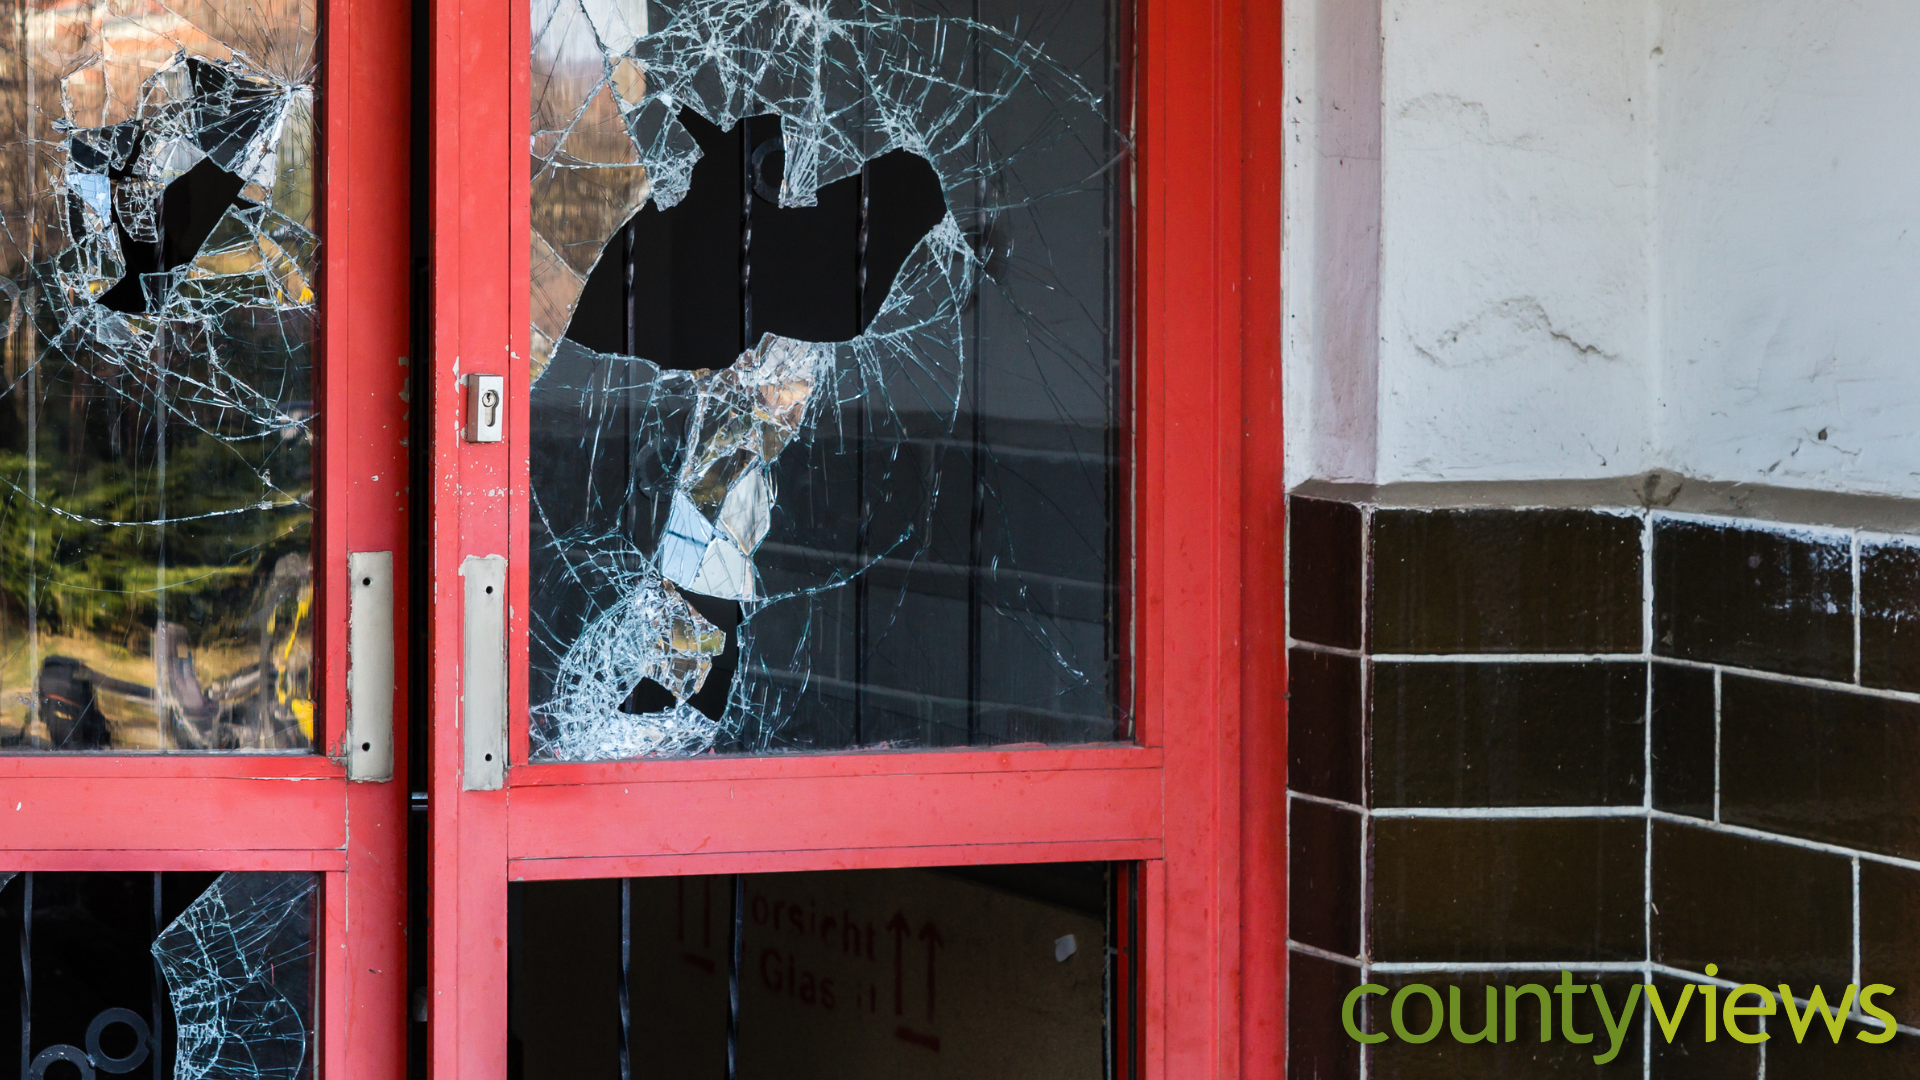 A smashed door next to the County Views logo